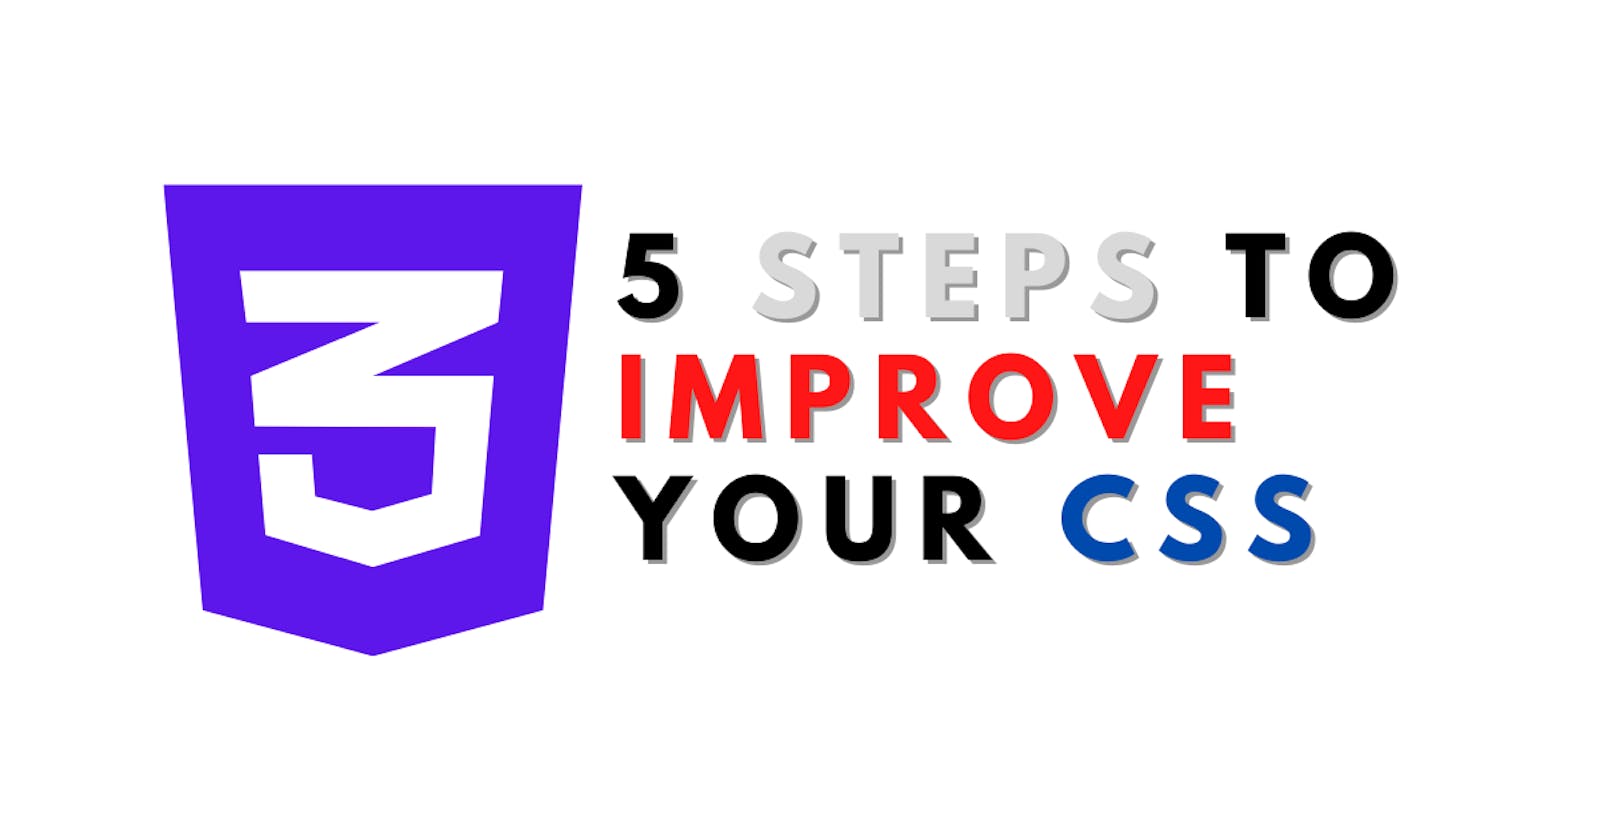 5 Steps To Improve Your CSS